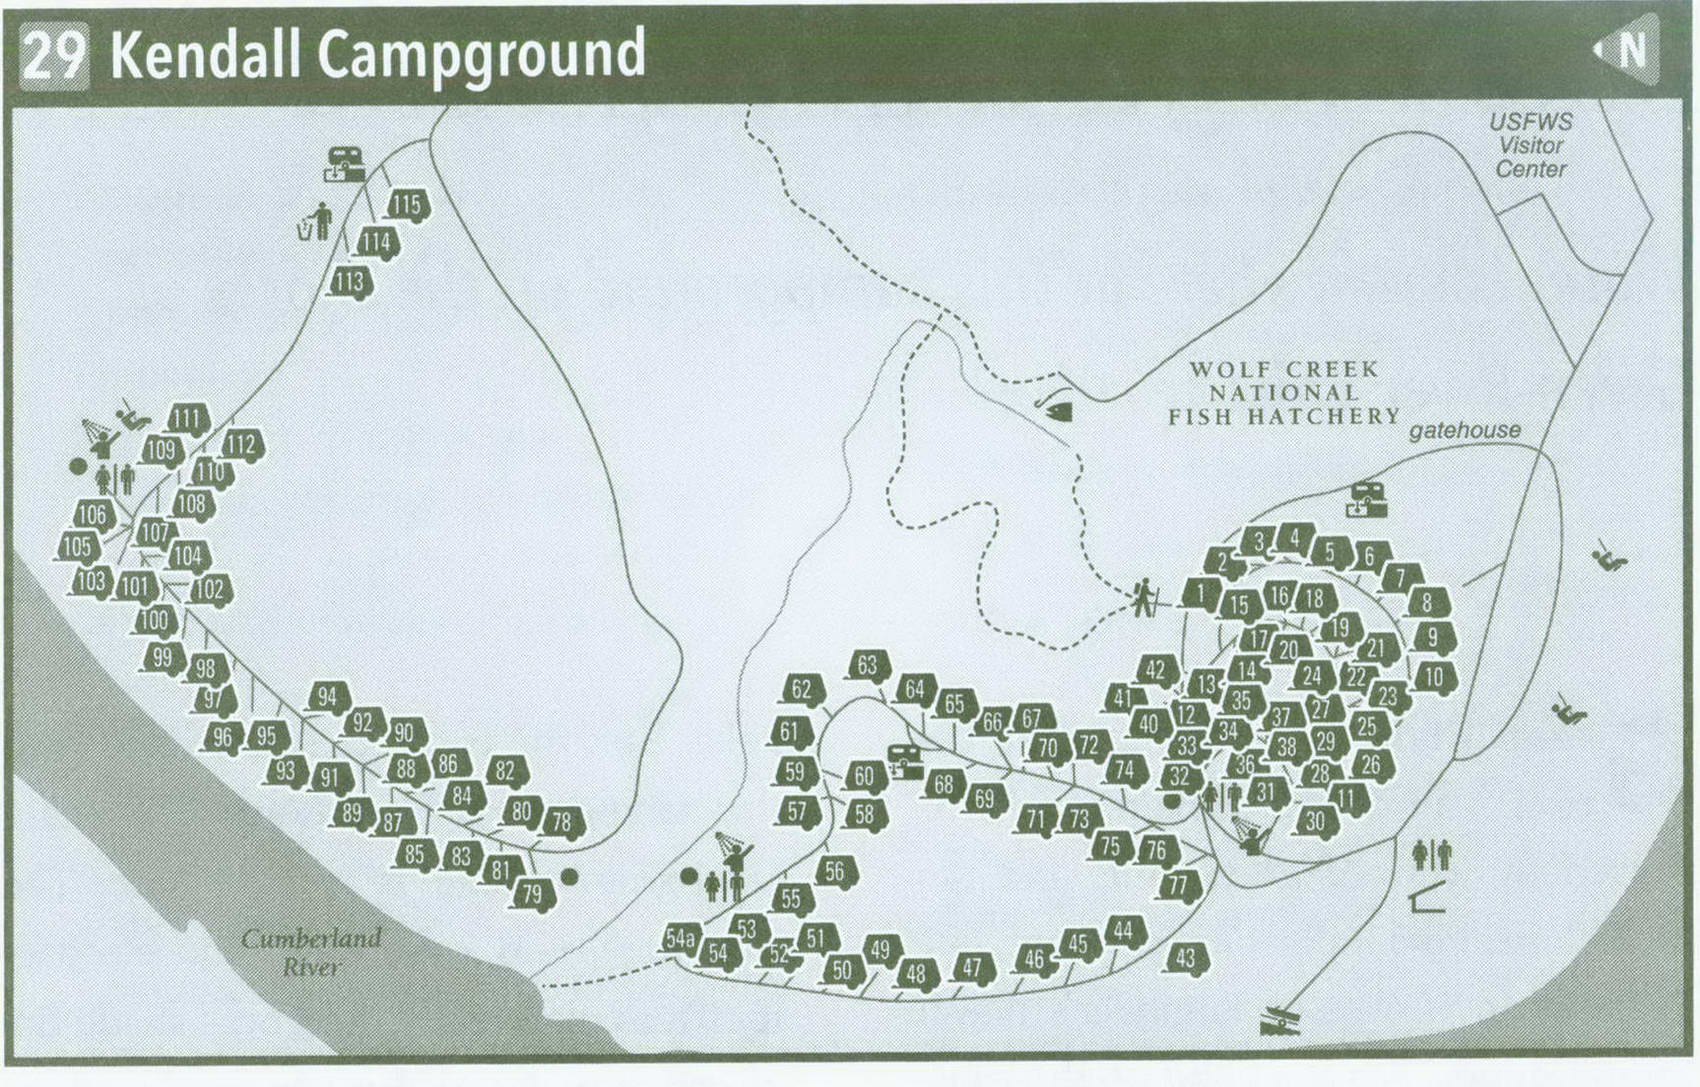 Plan of Kendall Campground